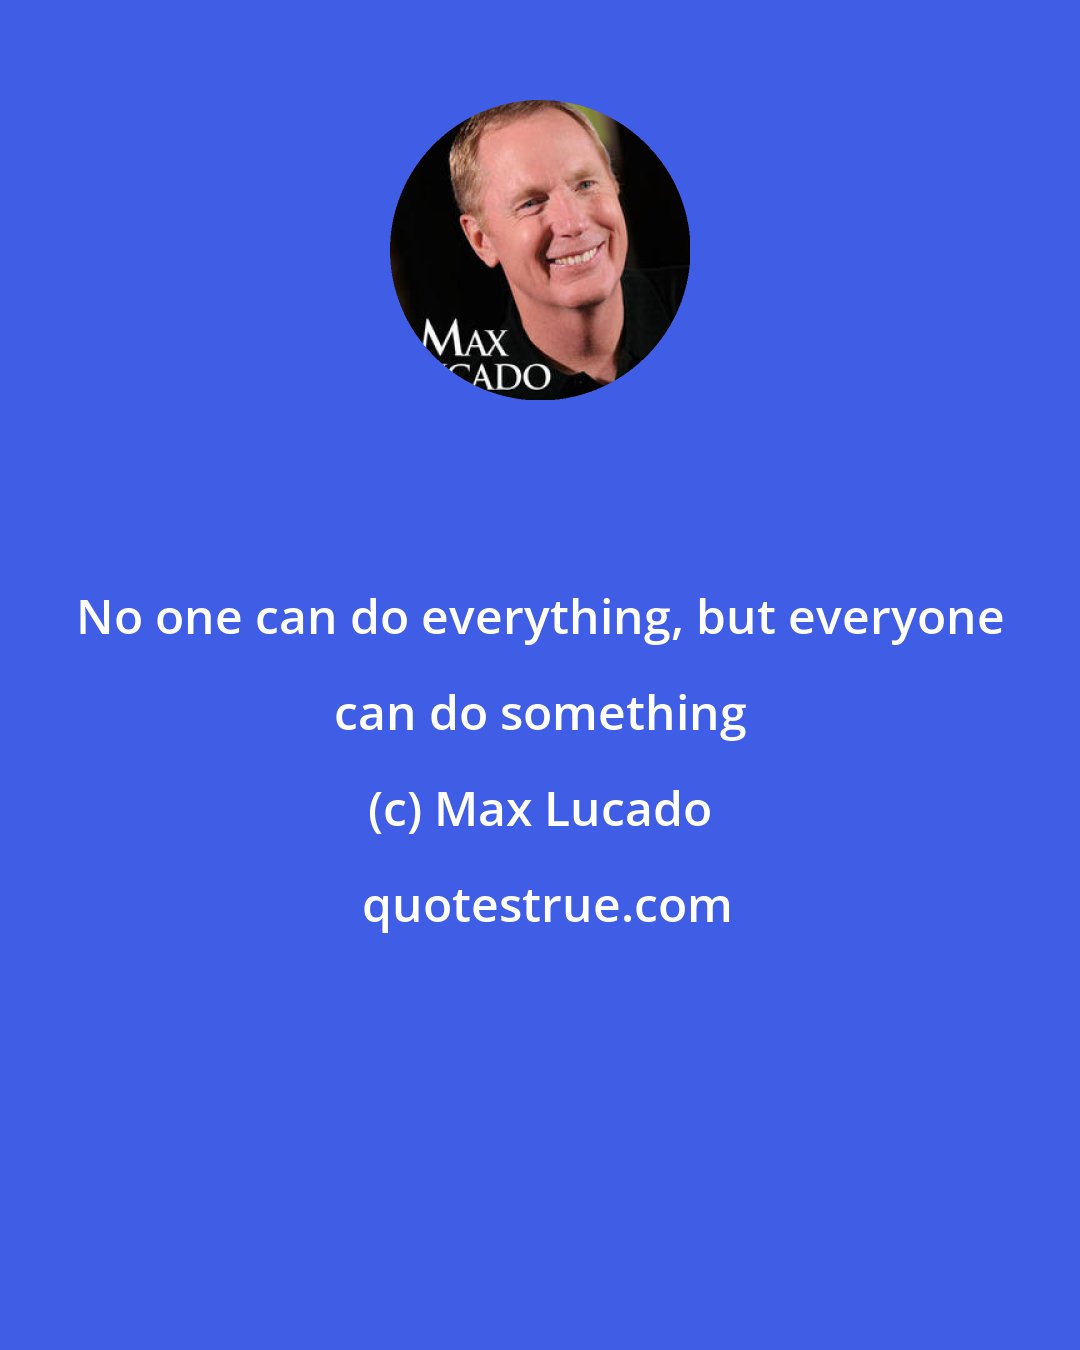 Max Lucado: No one can do everything, but everyone can do something